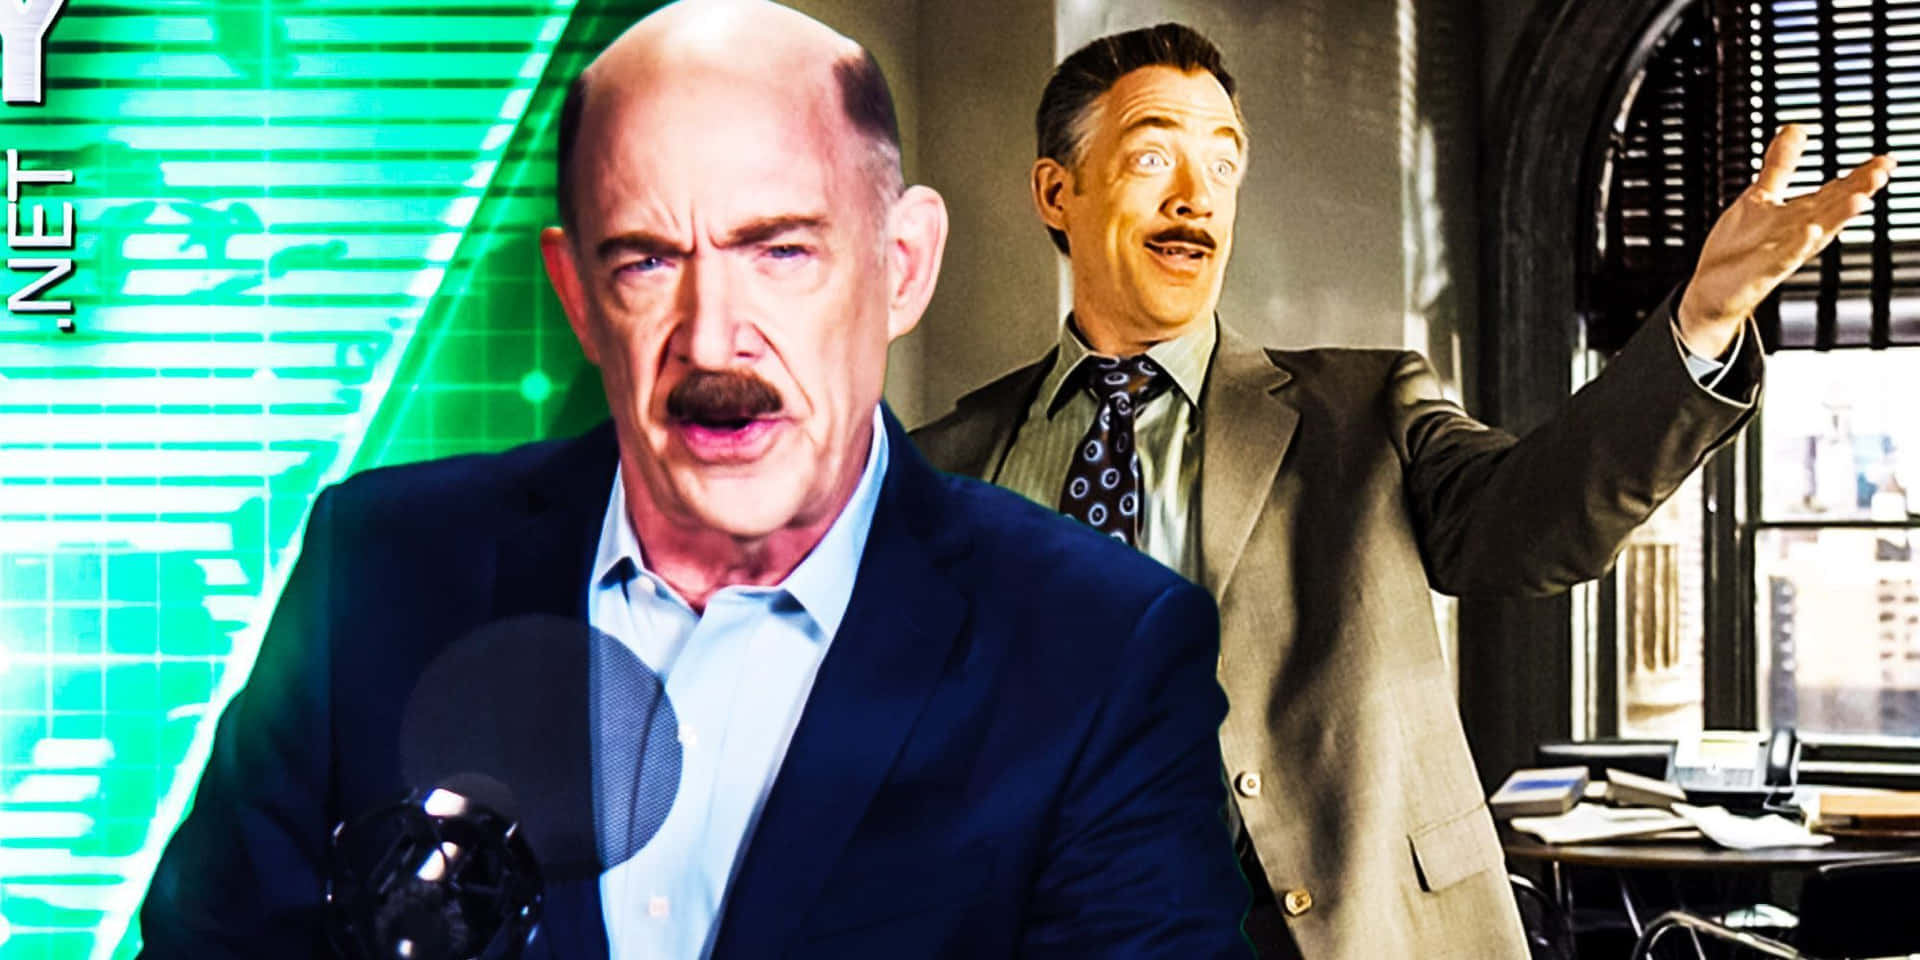 J. Jonah Jameson in action at the Daily Bugle office Wallpaper